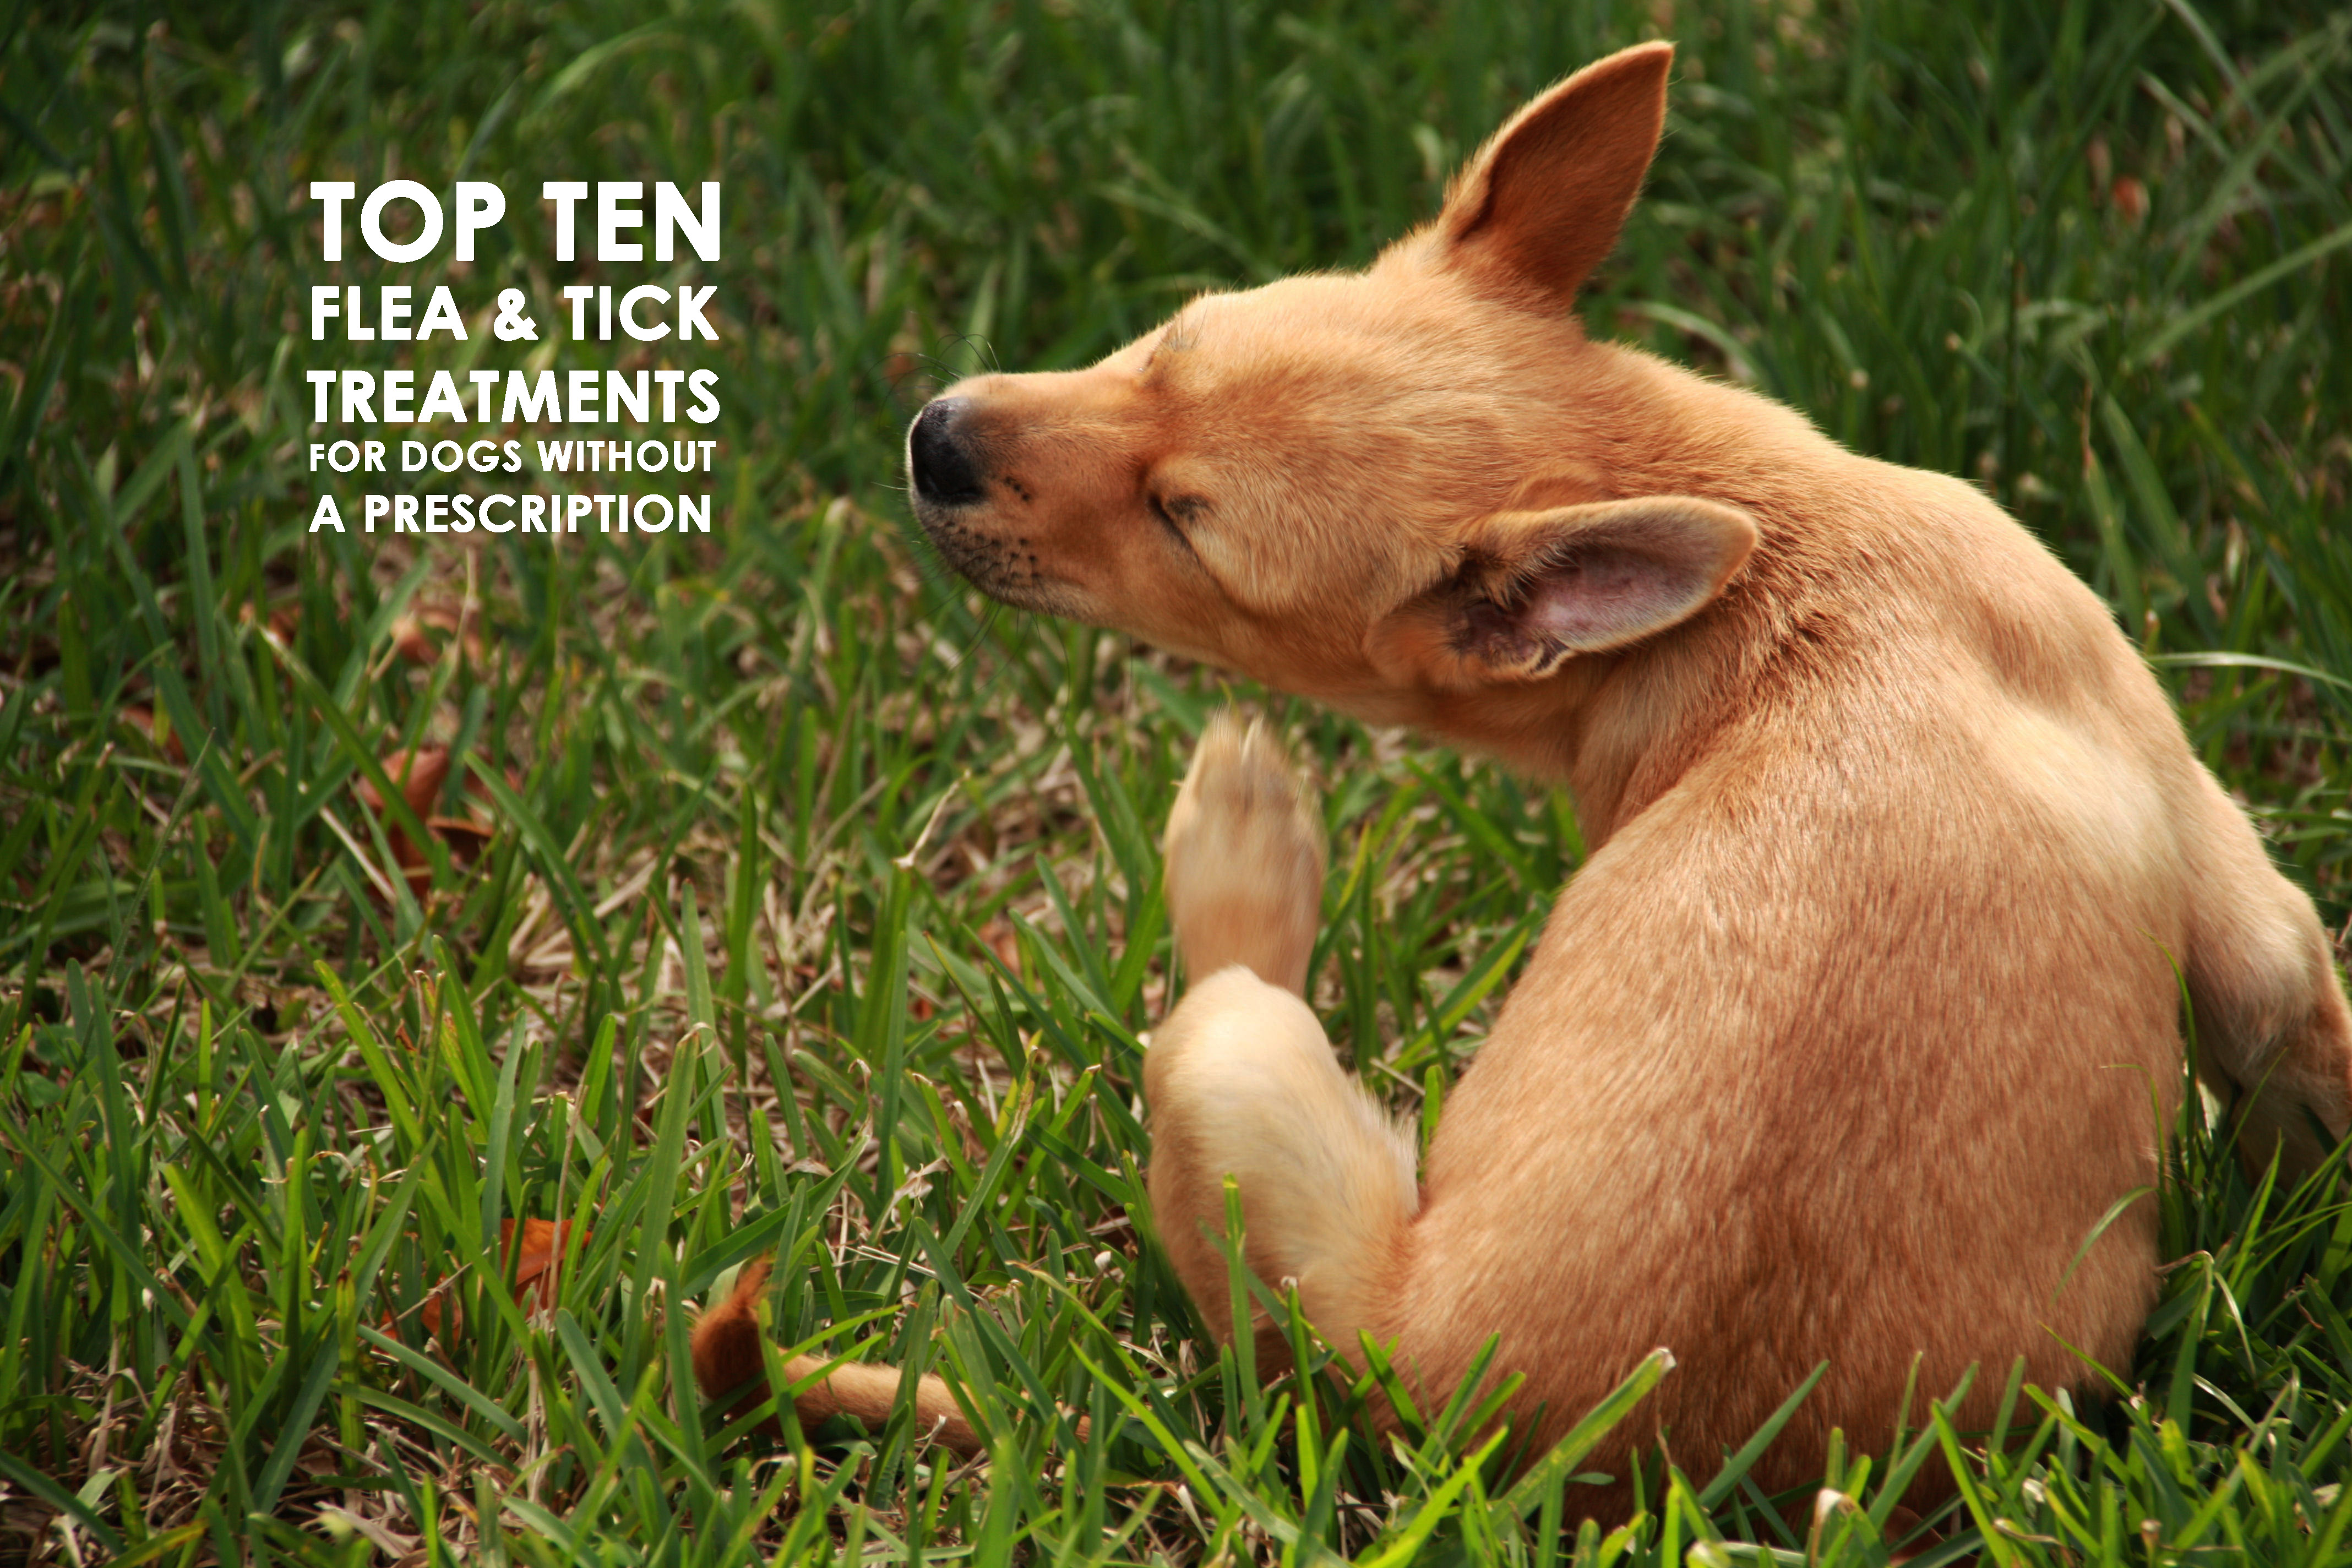 most effective flea and tick treatment for dogs